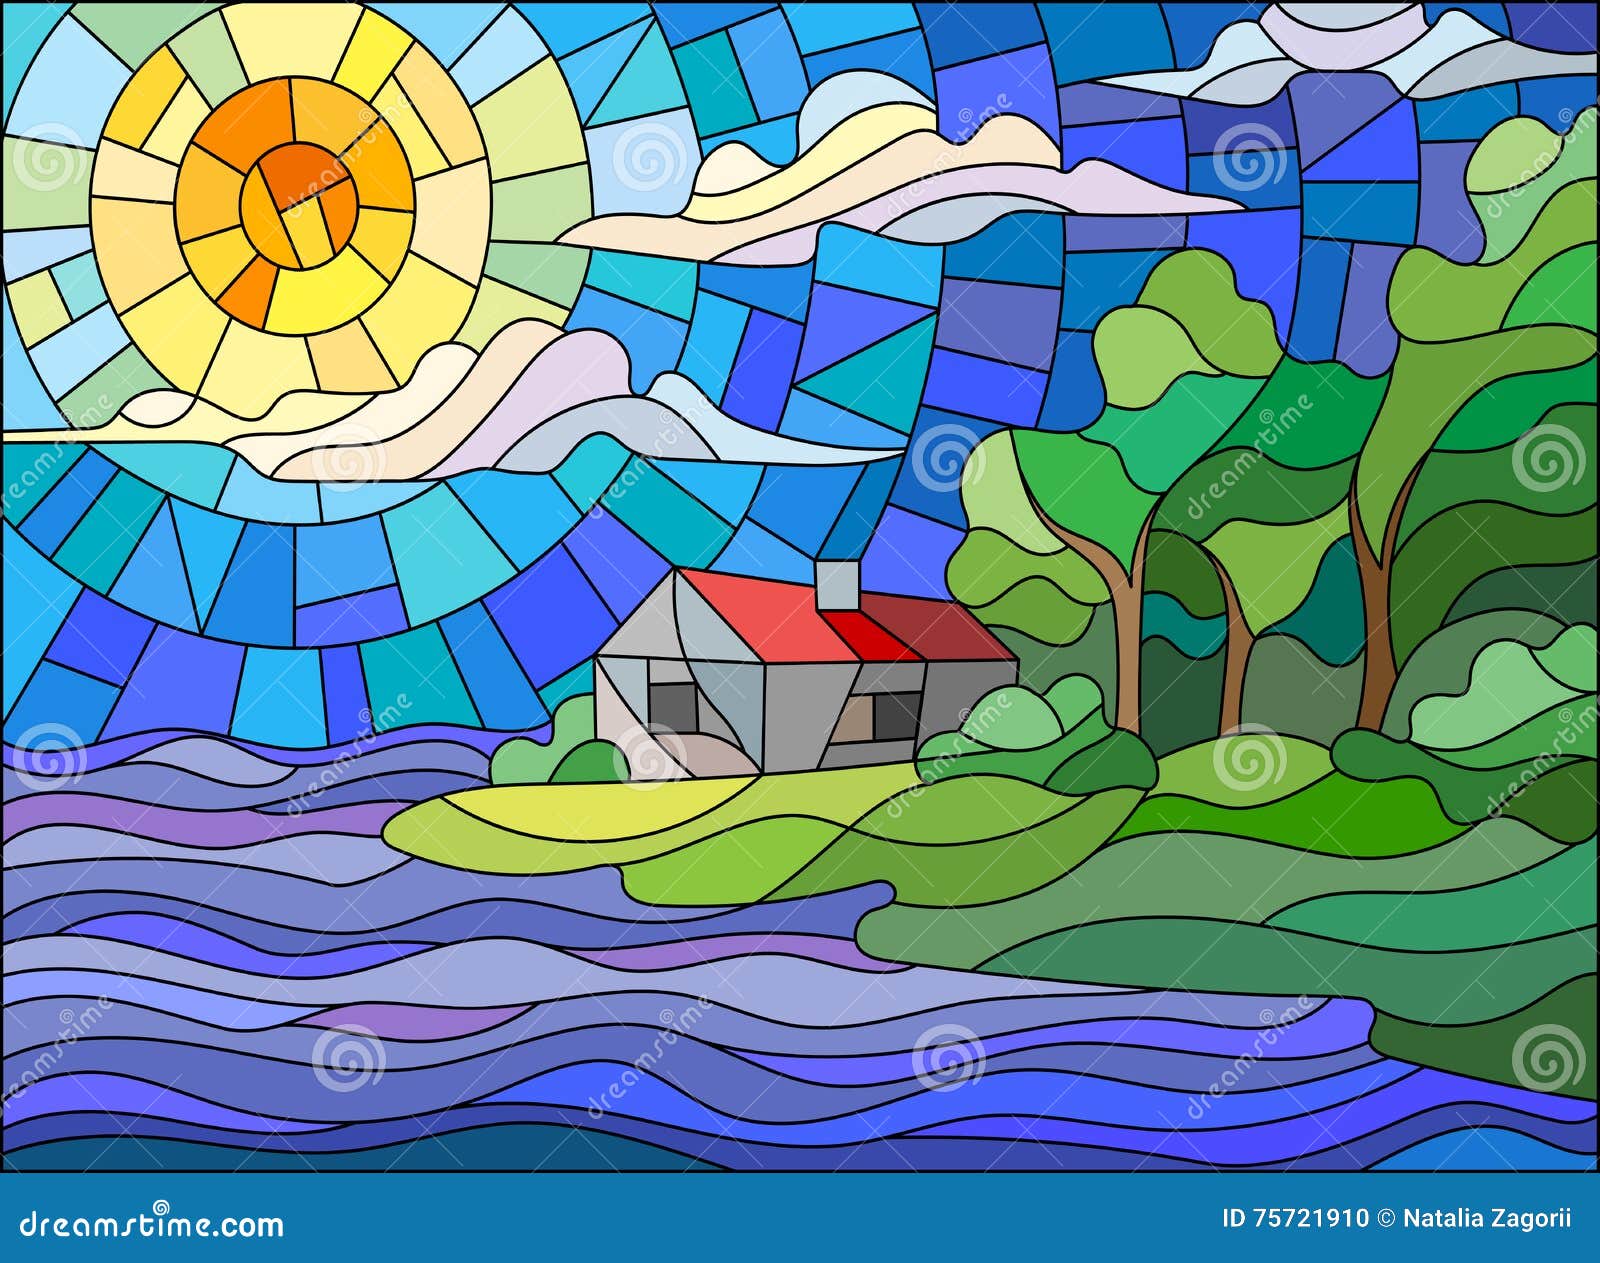 Seashore Under Blue Skies Stained Glass Landscape